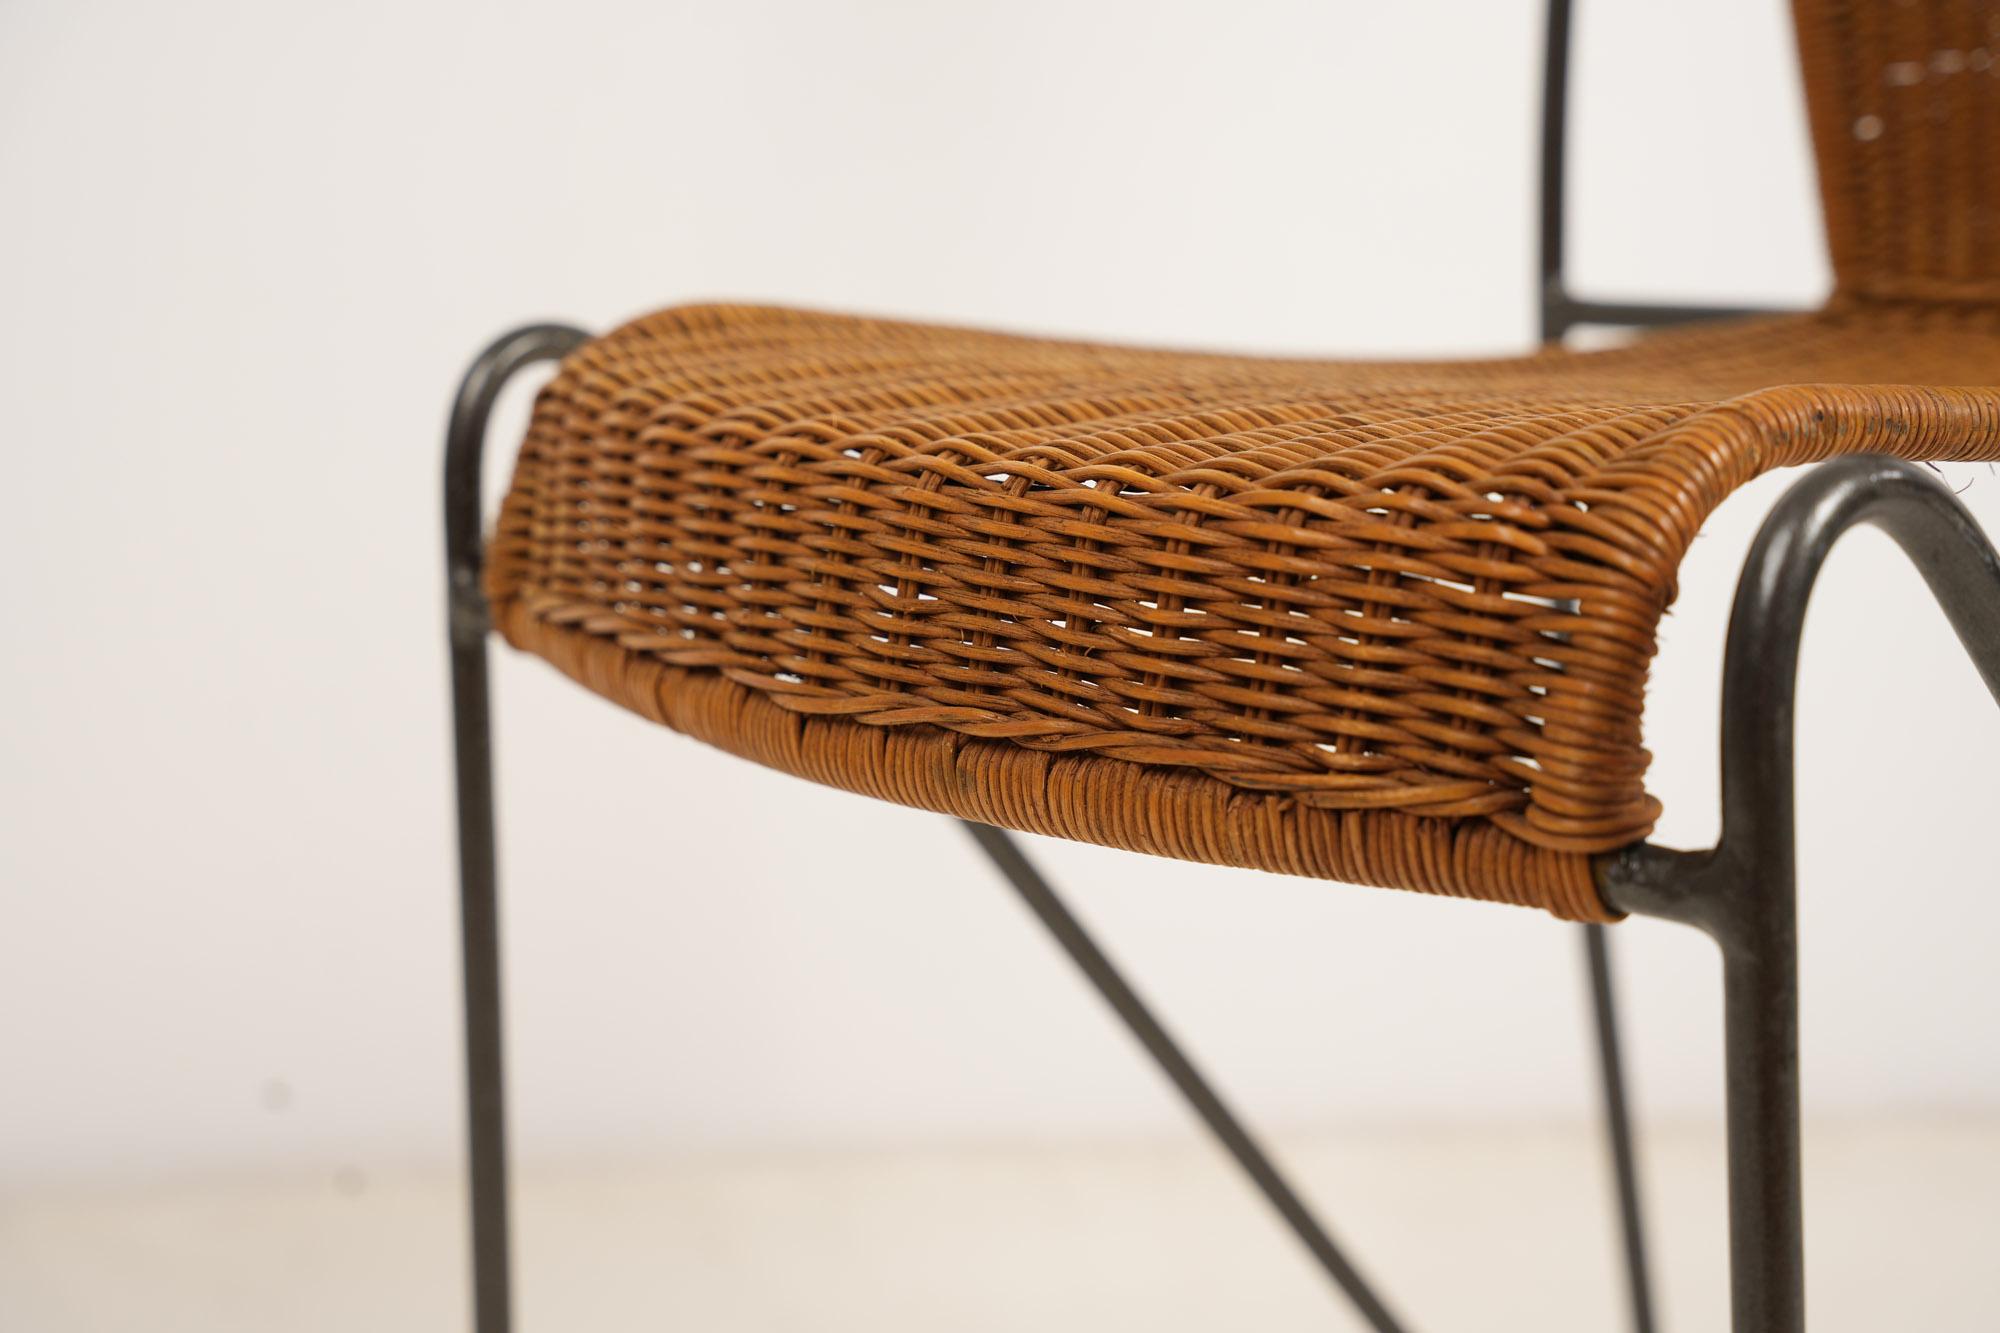 Wicker and Iron Chair By Frederic Weinberg 1950s For Sale 2